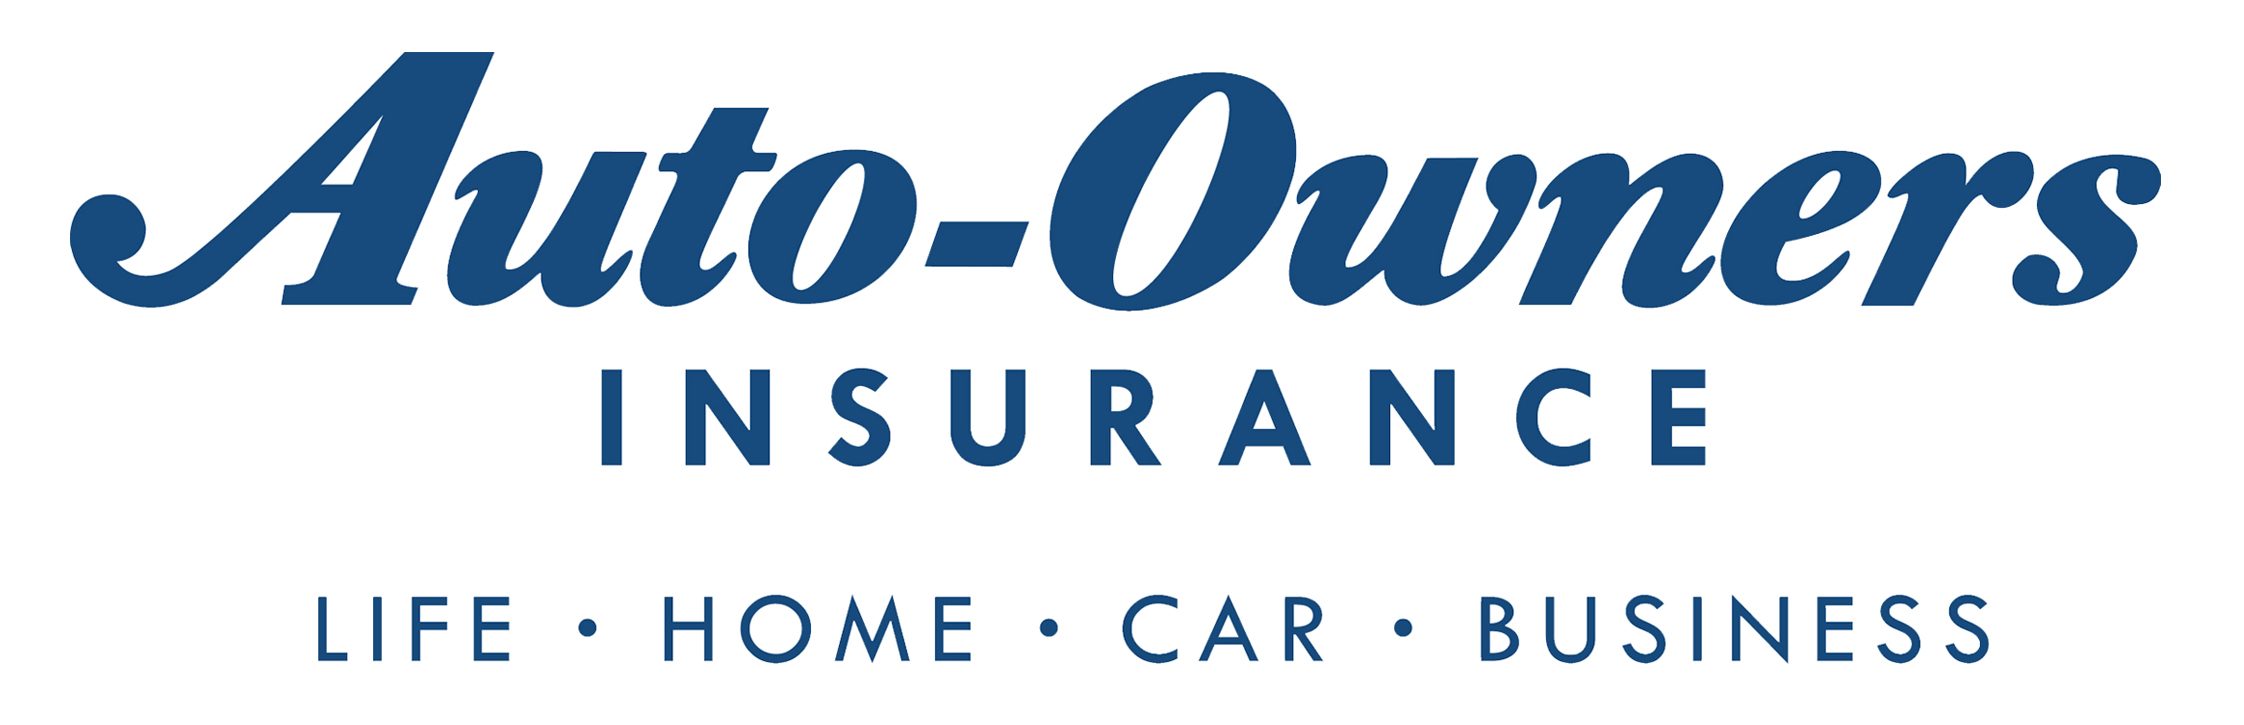 Auto owners Insurance